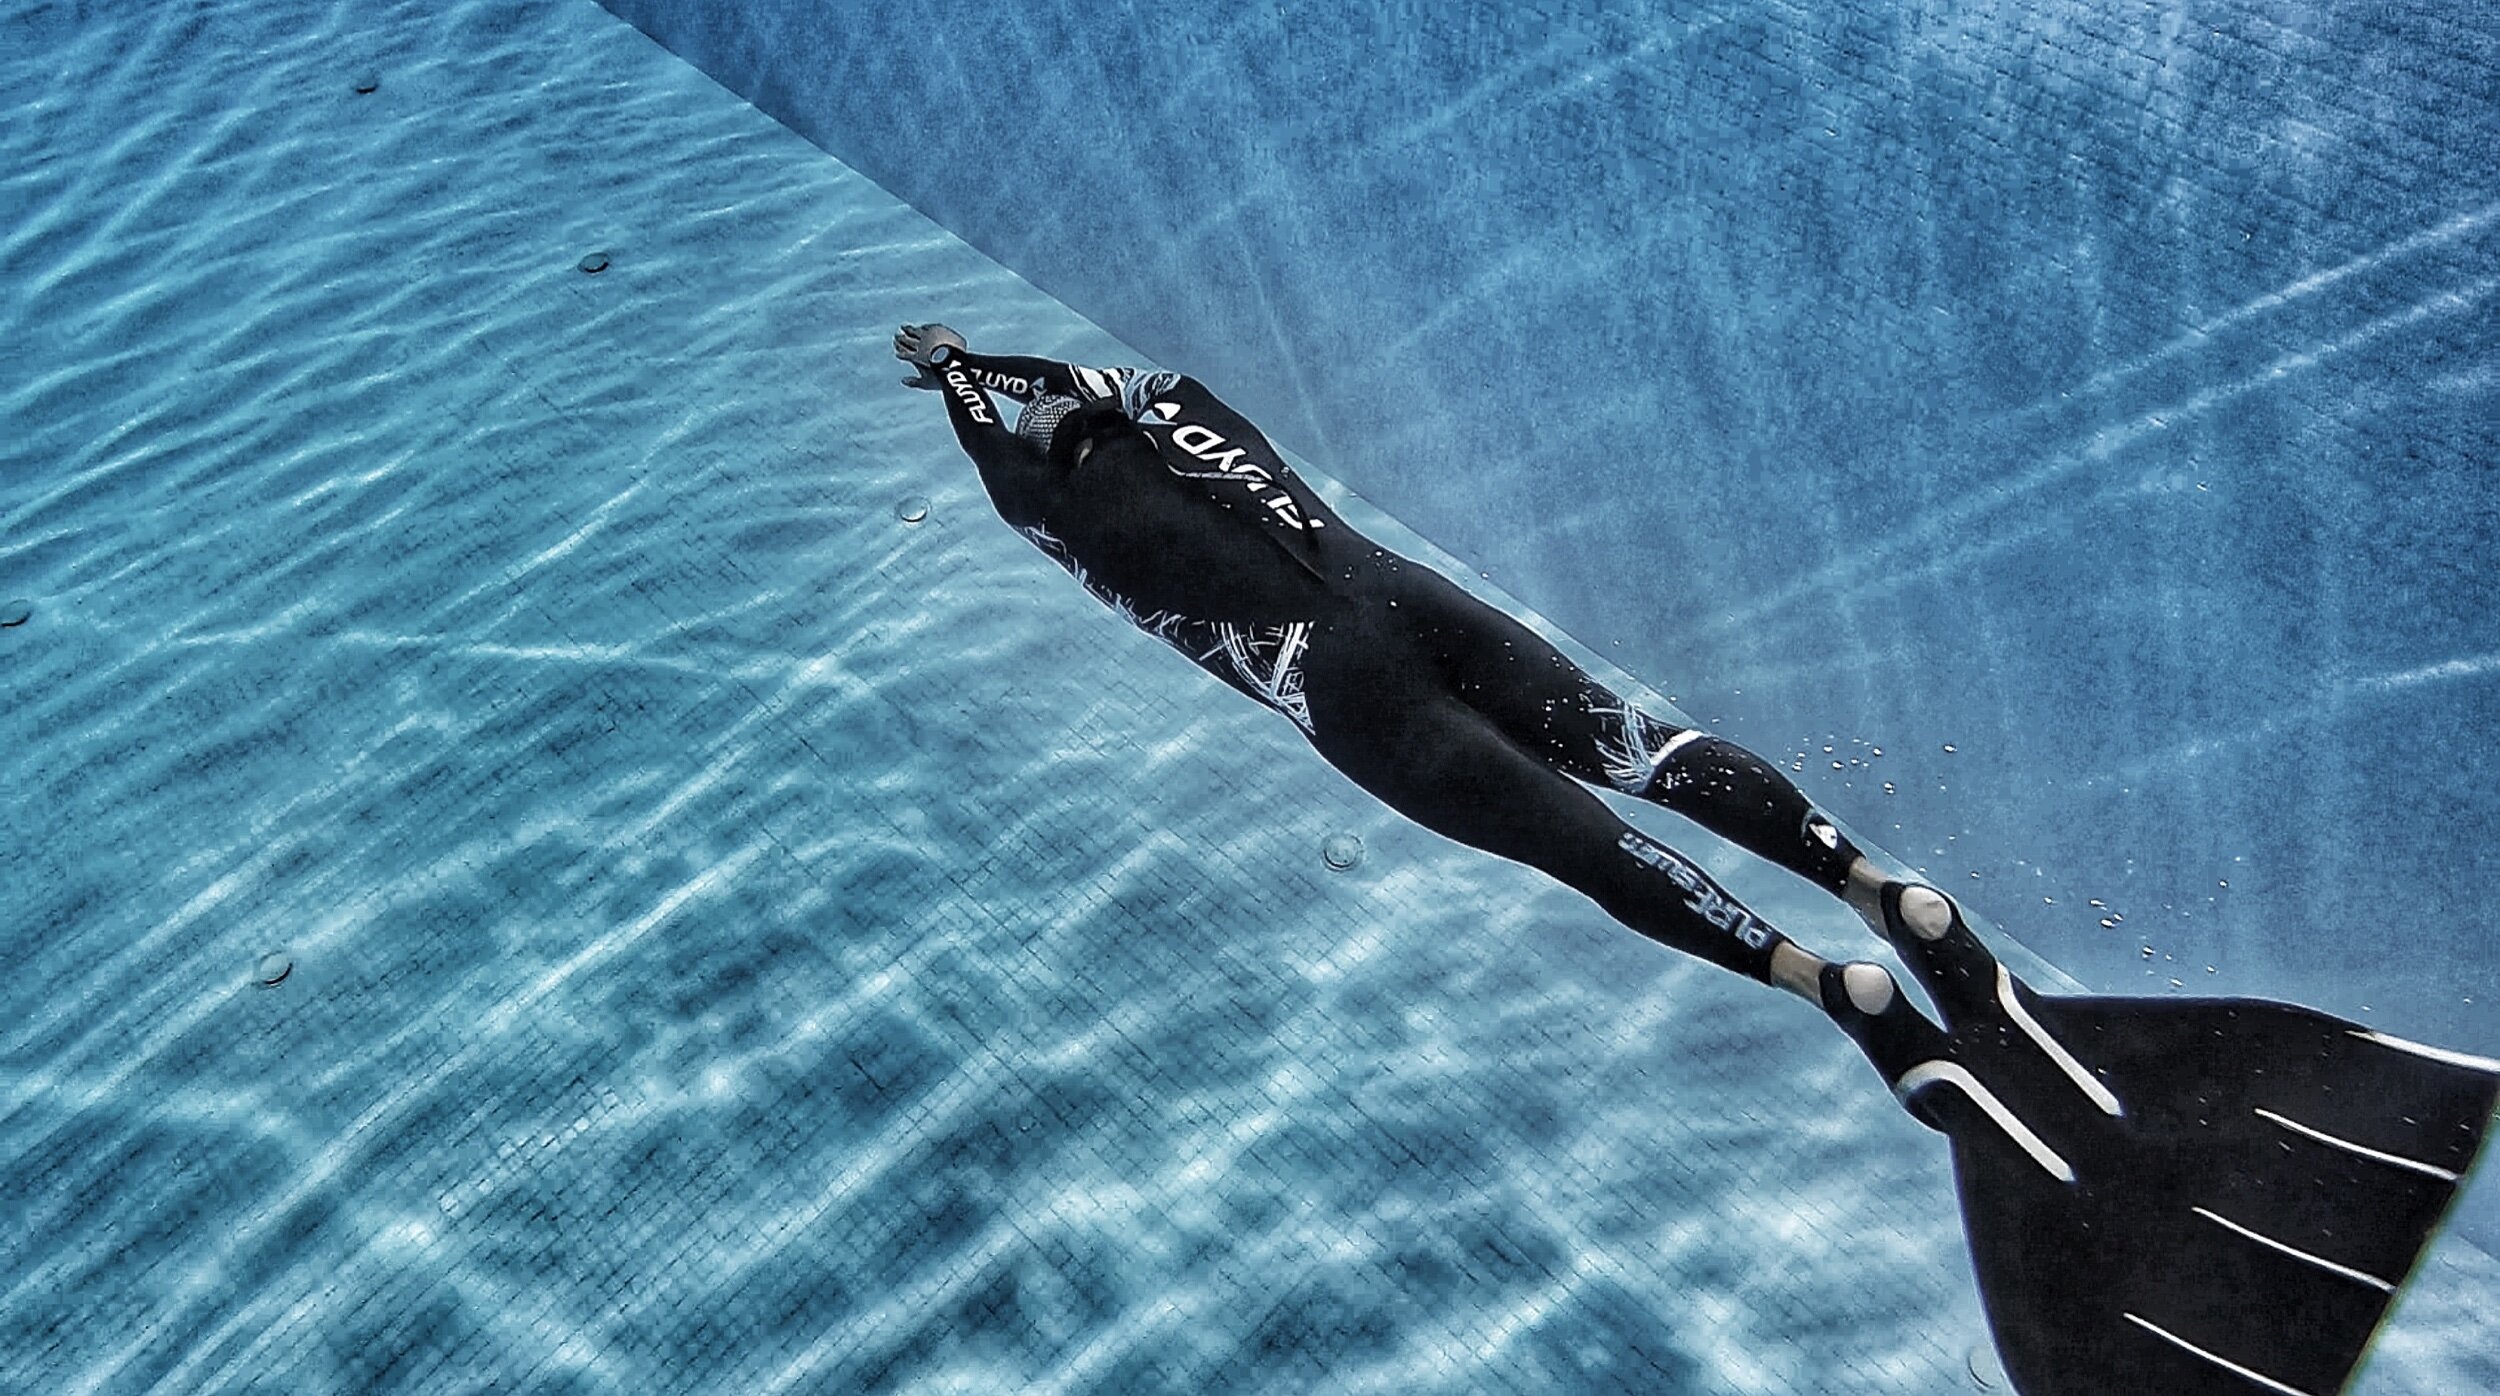 Freediving: Breath-hold swimming with a monofin training session in the swimming pool. 2500x1400 HD Wallpaper.